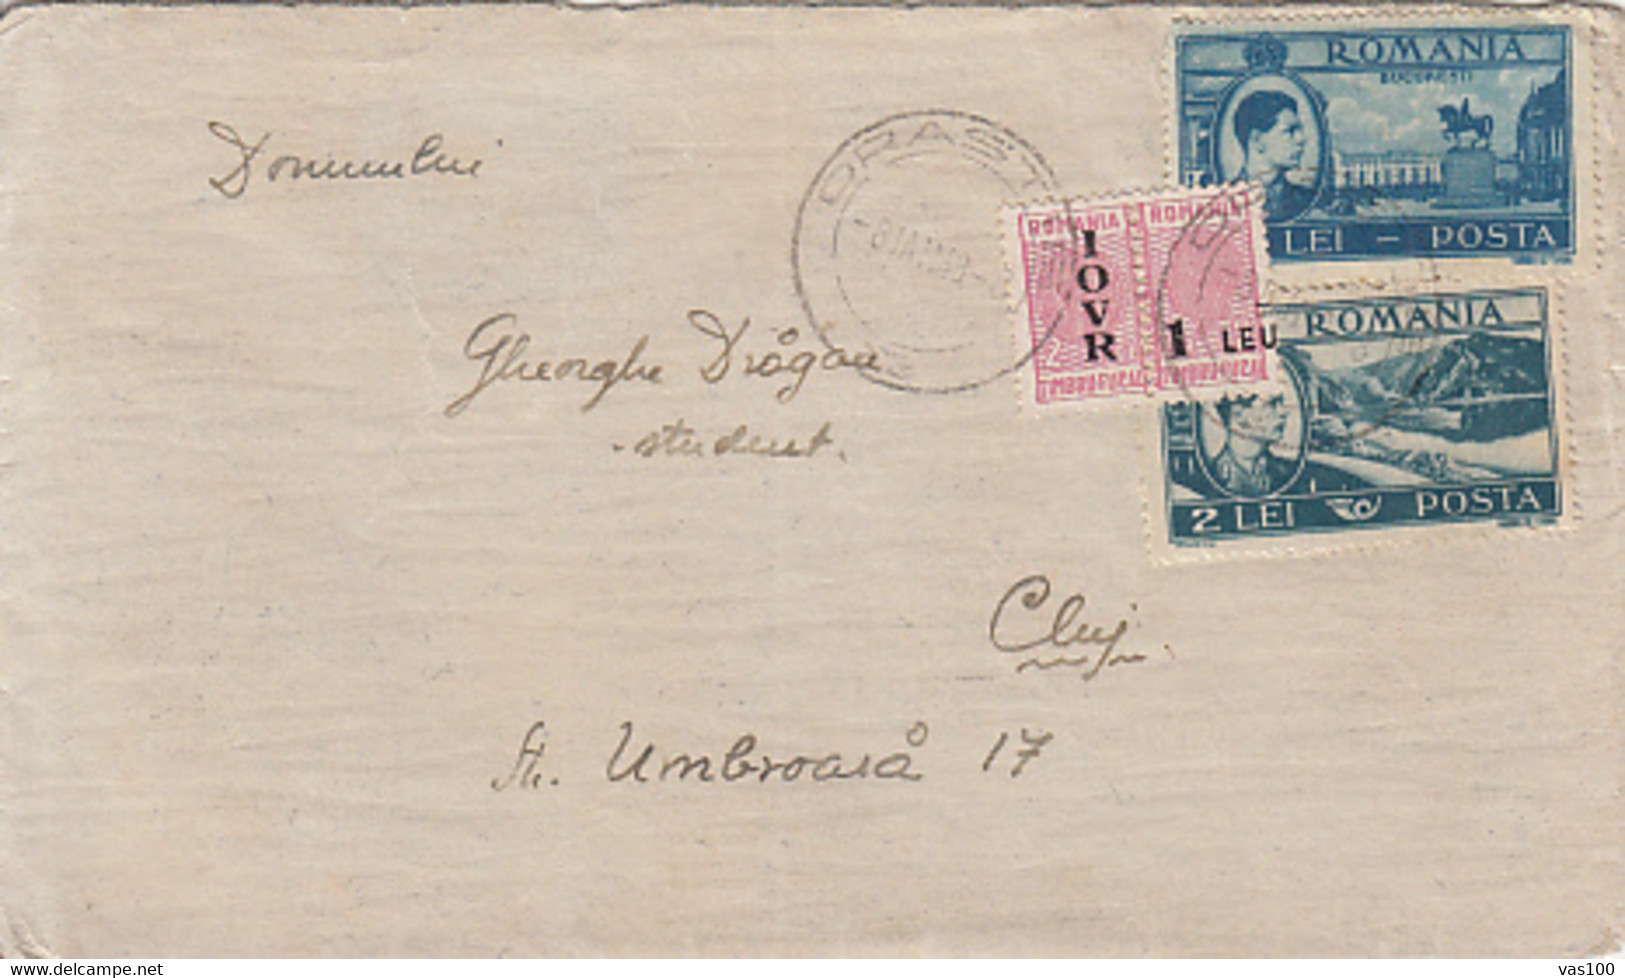 IOVR OVERPRINT REVENUE STAMP, KING MICHAEL, DANUBE, SHIP, BUCHAREST STATUE STAMPS ON COVER, 1948, ROMANIA - Fiscales